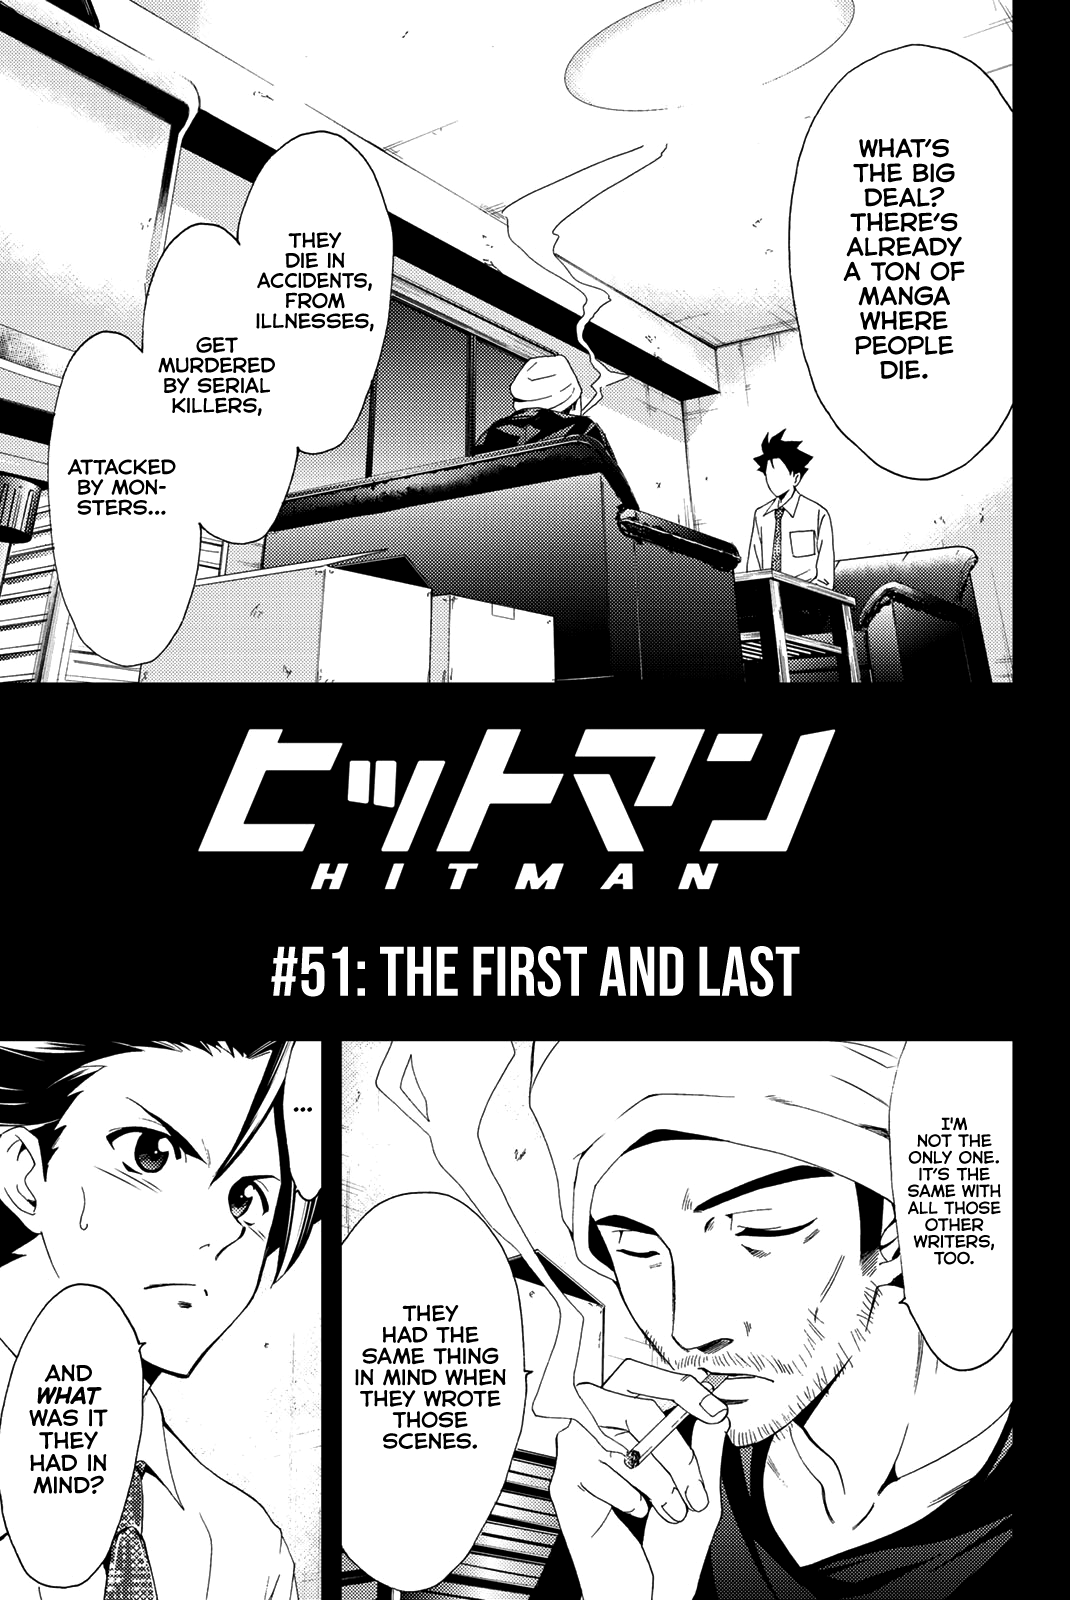 Hitman (Kouji Seo) Chapter 51: The First And Last - Picture 2